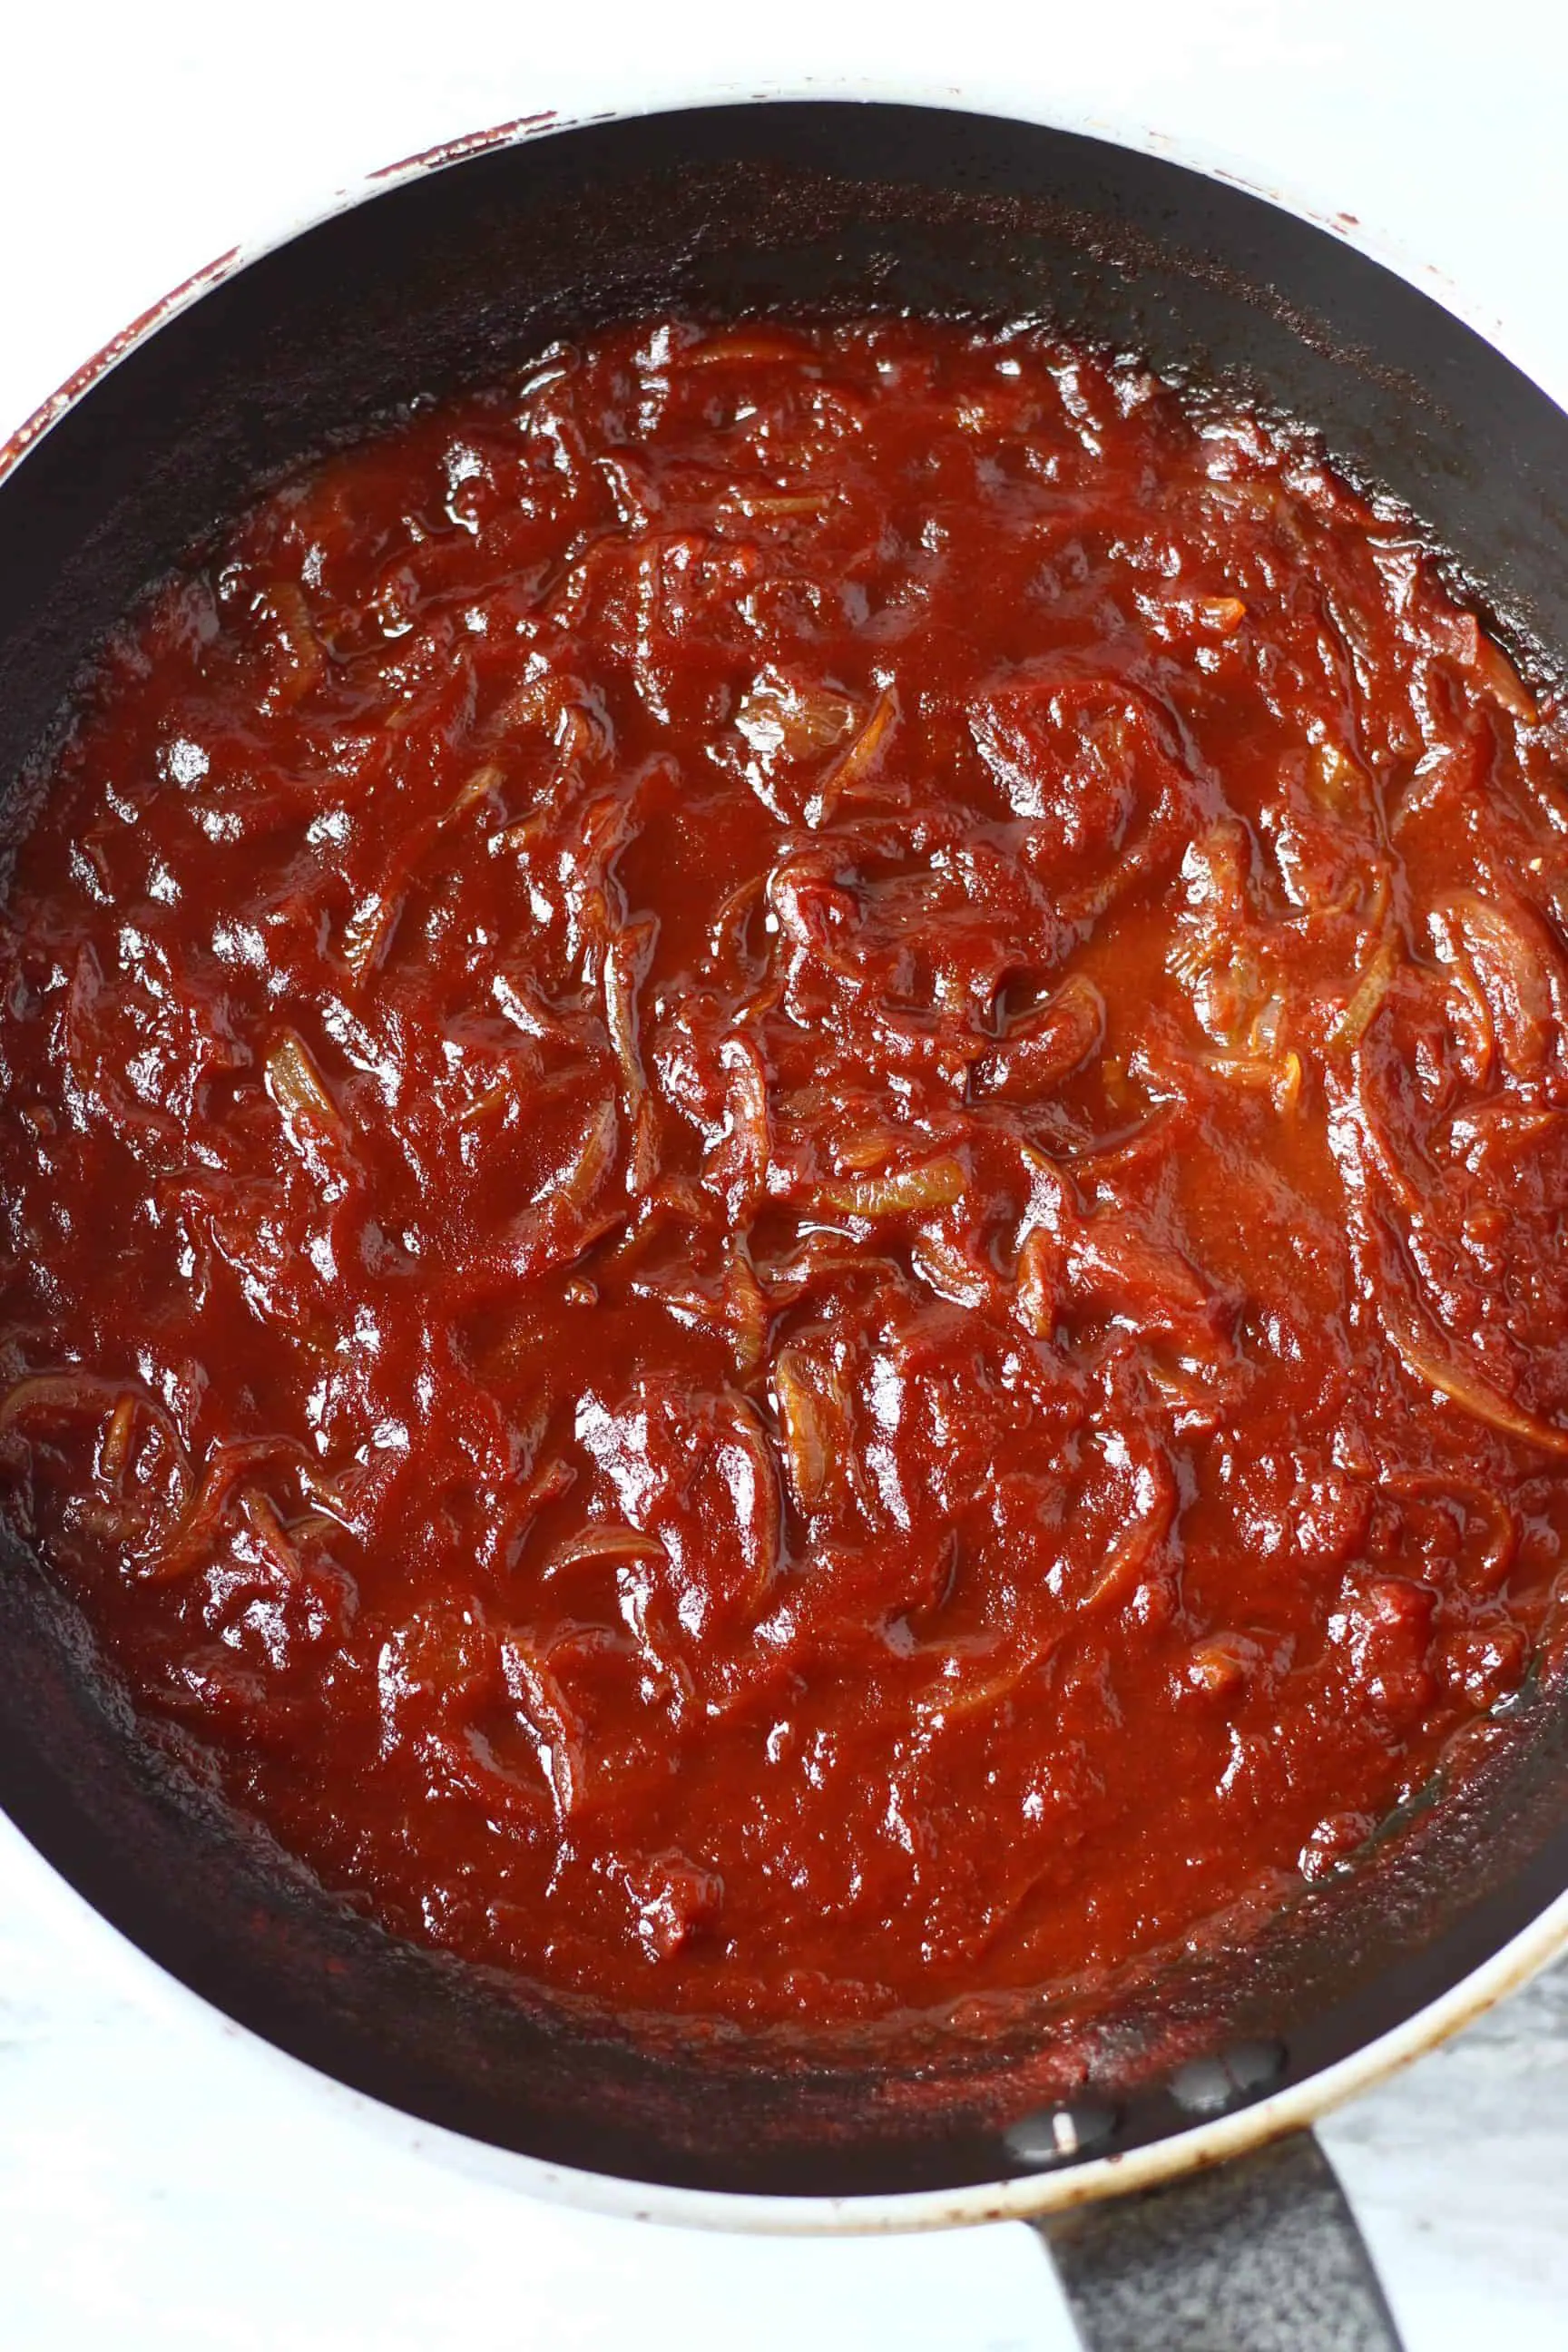 Onions with tomato sauce in a black frying pan against a marble background